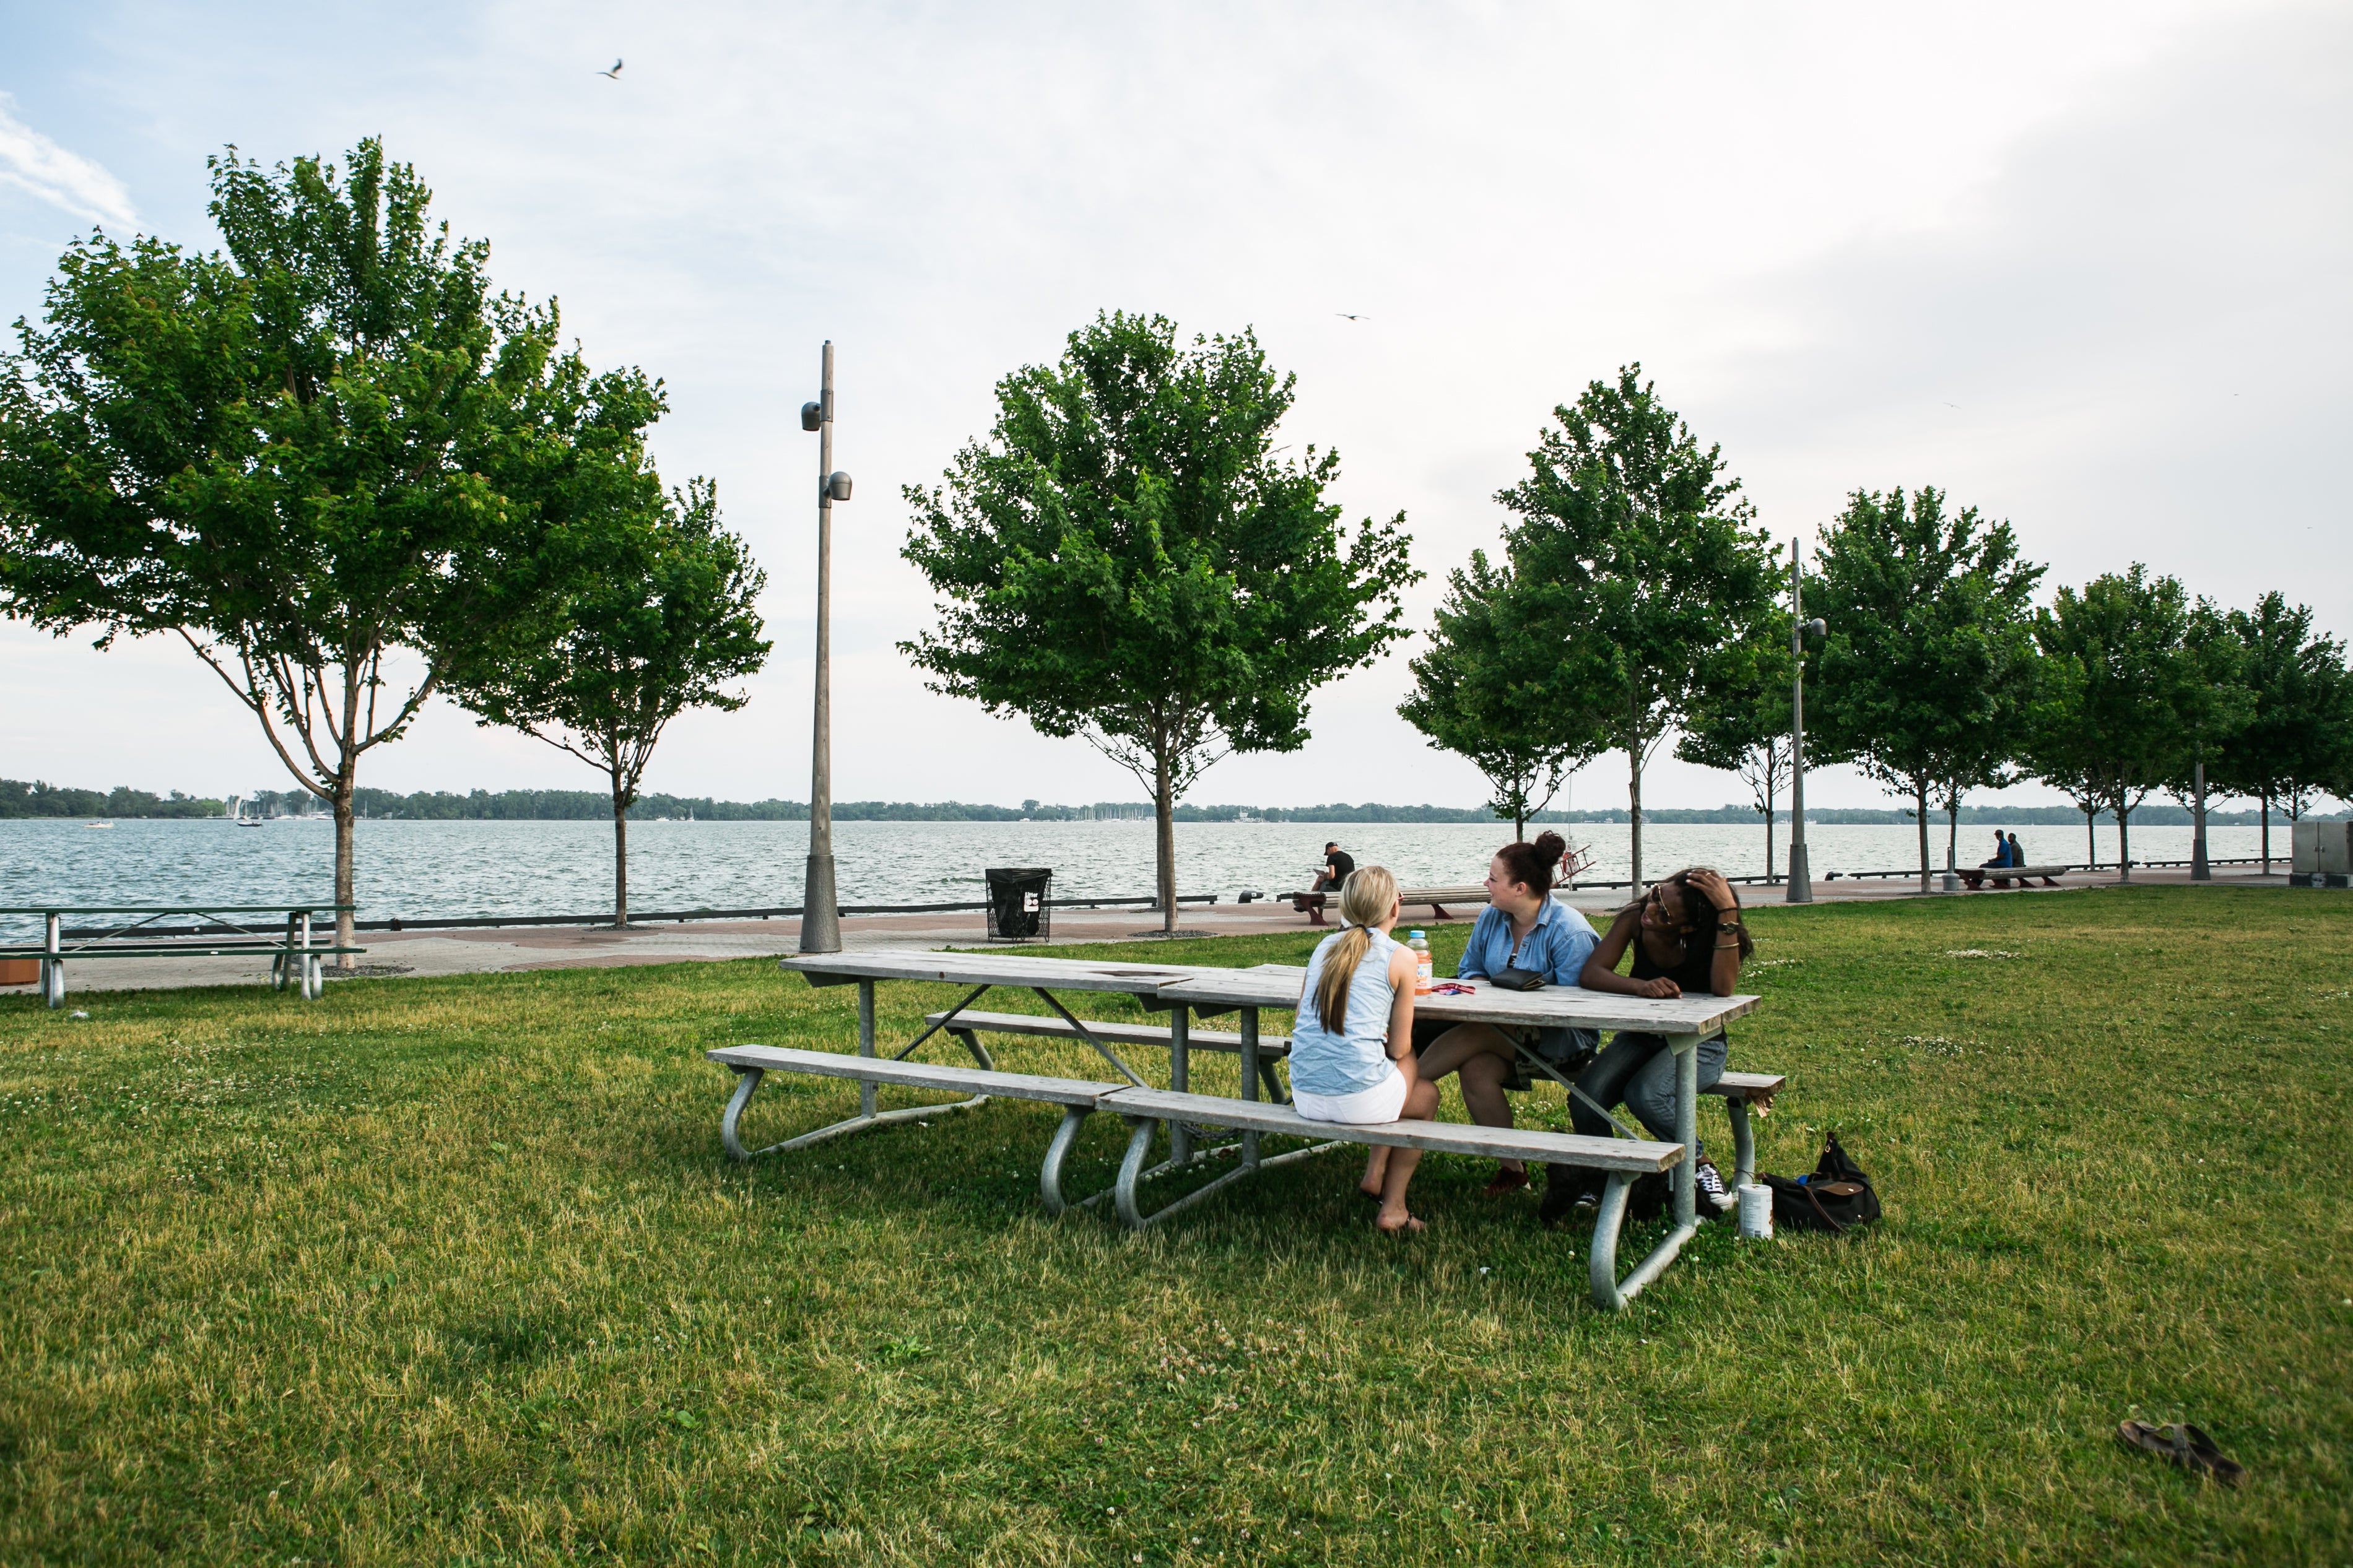 Students sitting at a picnic bench along the water's edge at Sherbourne Common.